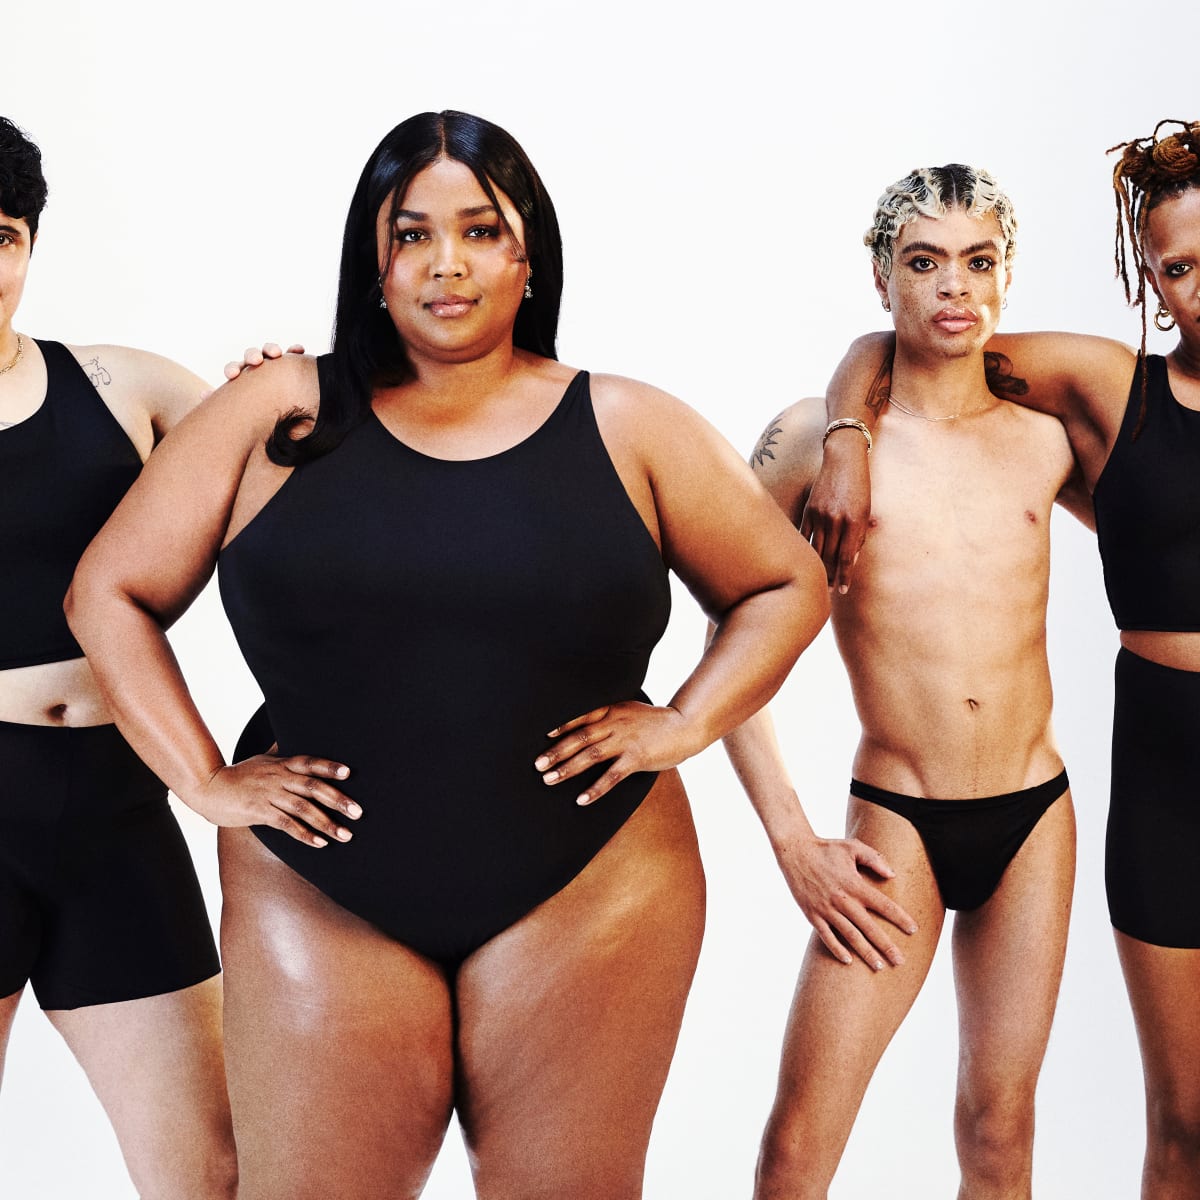 Gender-Affirming Underwear Brand Urbody Calls Out Lizzo's Yitty Over 'Your  Skin' Collection - Fashionista